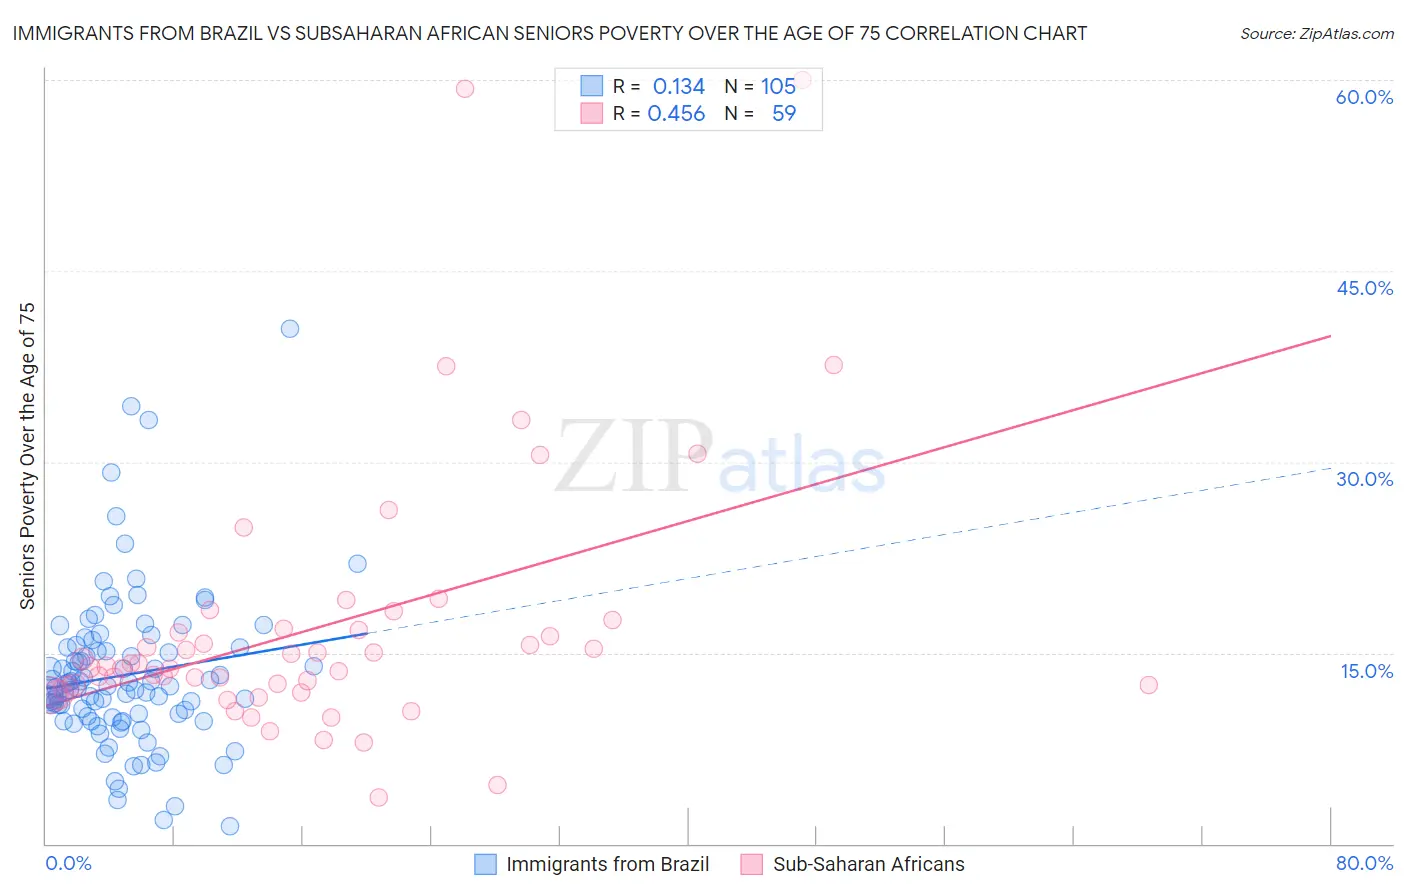 Immigrants from Brazil vs Subsaharan African Seniors Poverty Over the Age of 75